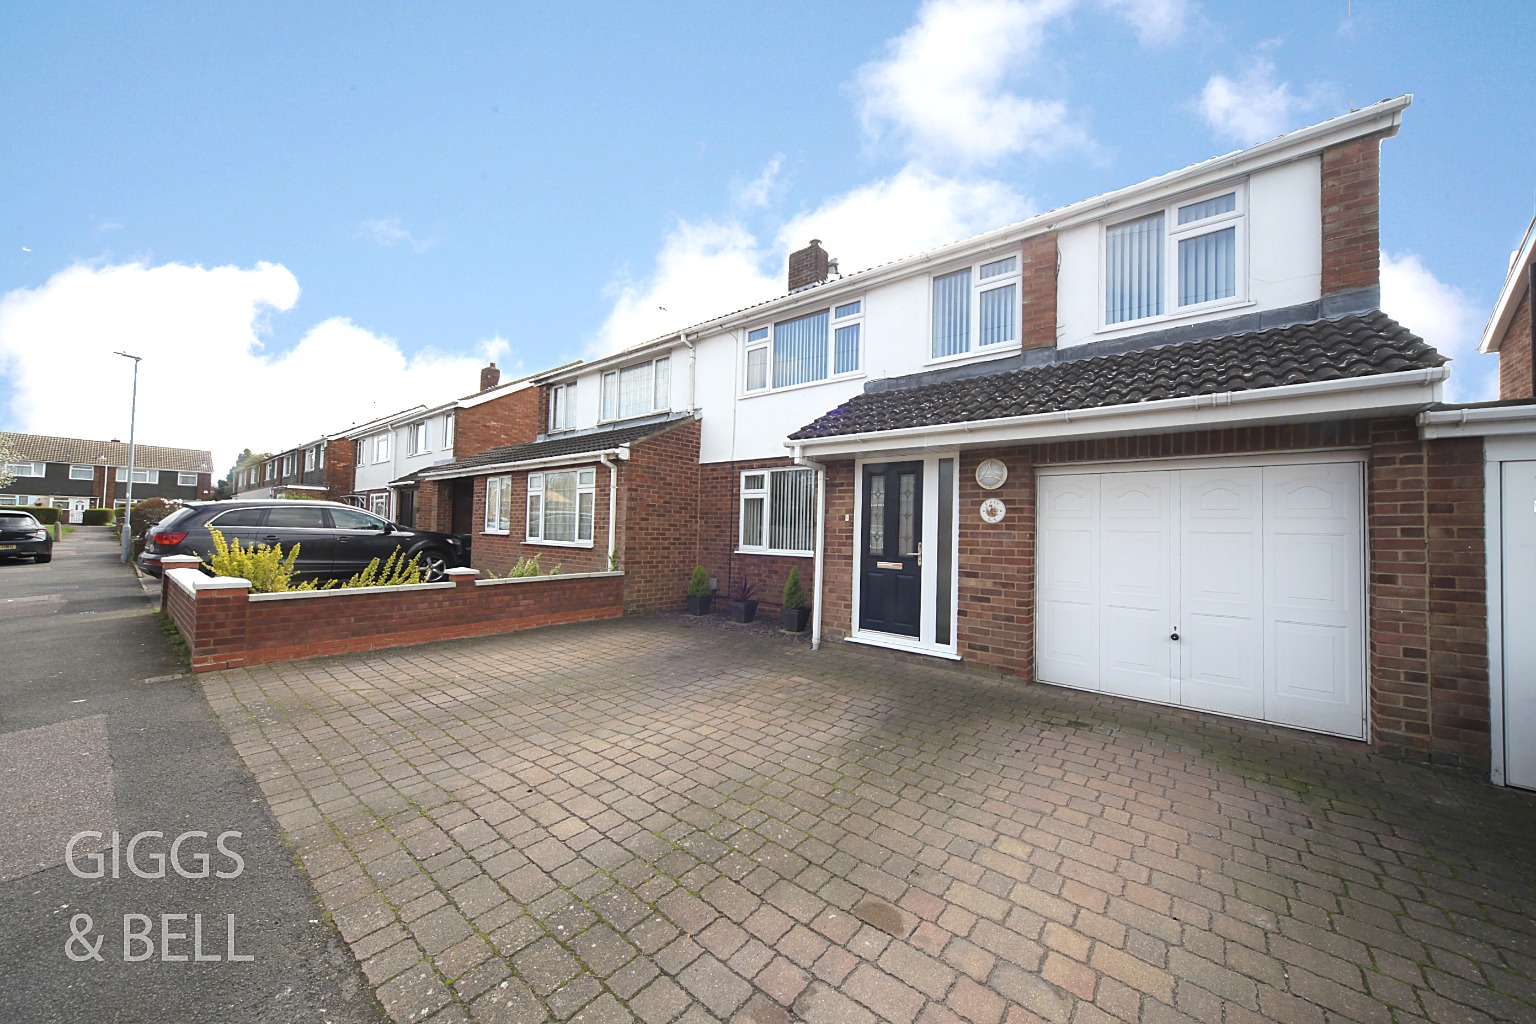 4 bed semi-detached house for sale in Kinross Crescent, Luton, LU3 